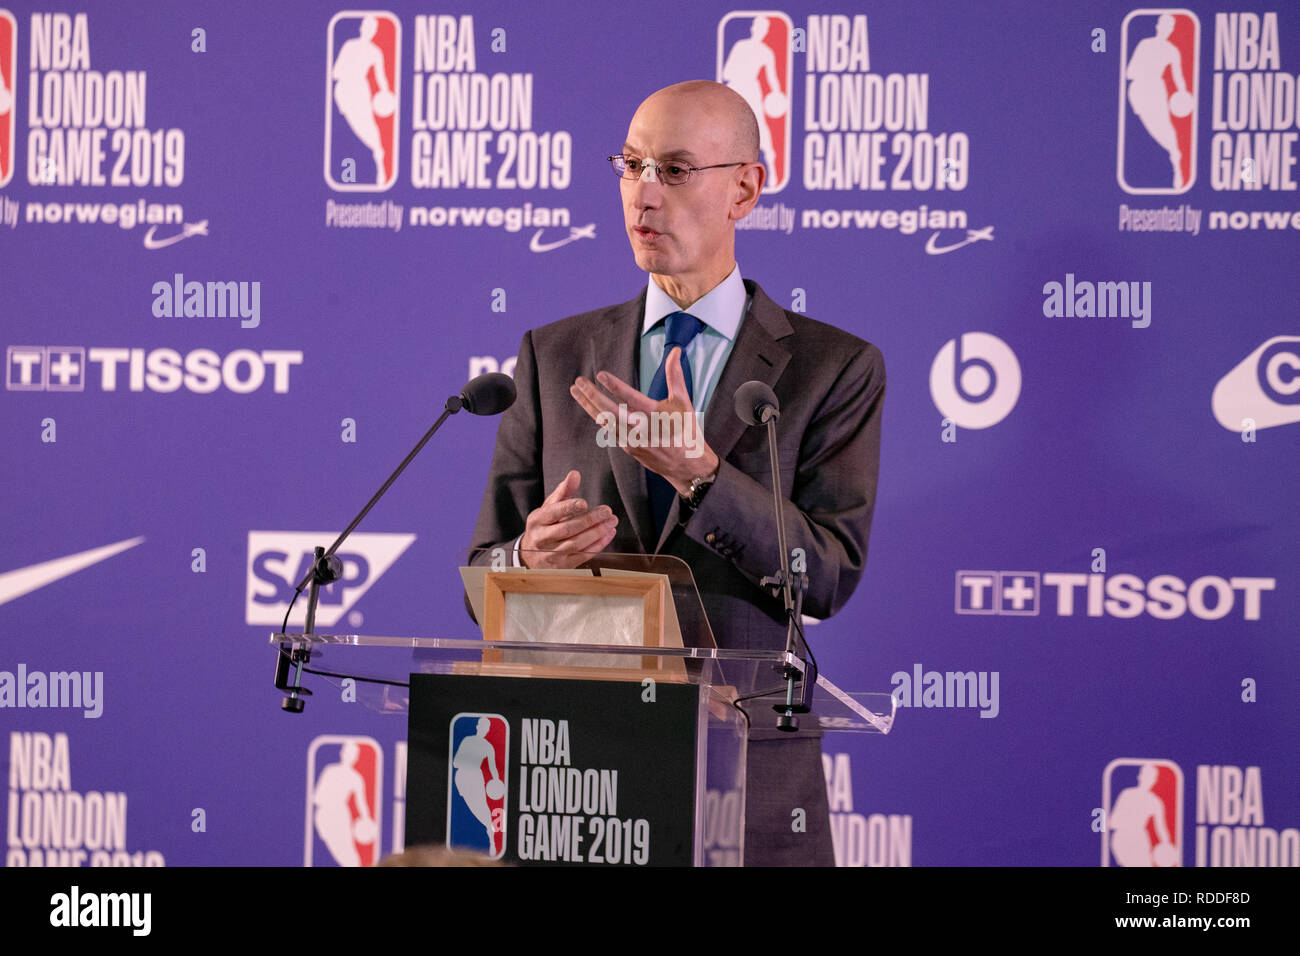 London, UK. 17th Jan 2019. NBA Commissioner Adam Silver Gives a press conference before the  London Game 2019 Washington Wizards vs. New York Knicks at the O2 Arena, Uk, Credit: Jason Richardson/Alamy Live News Stock Photo